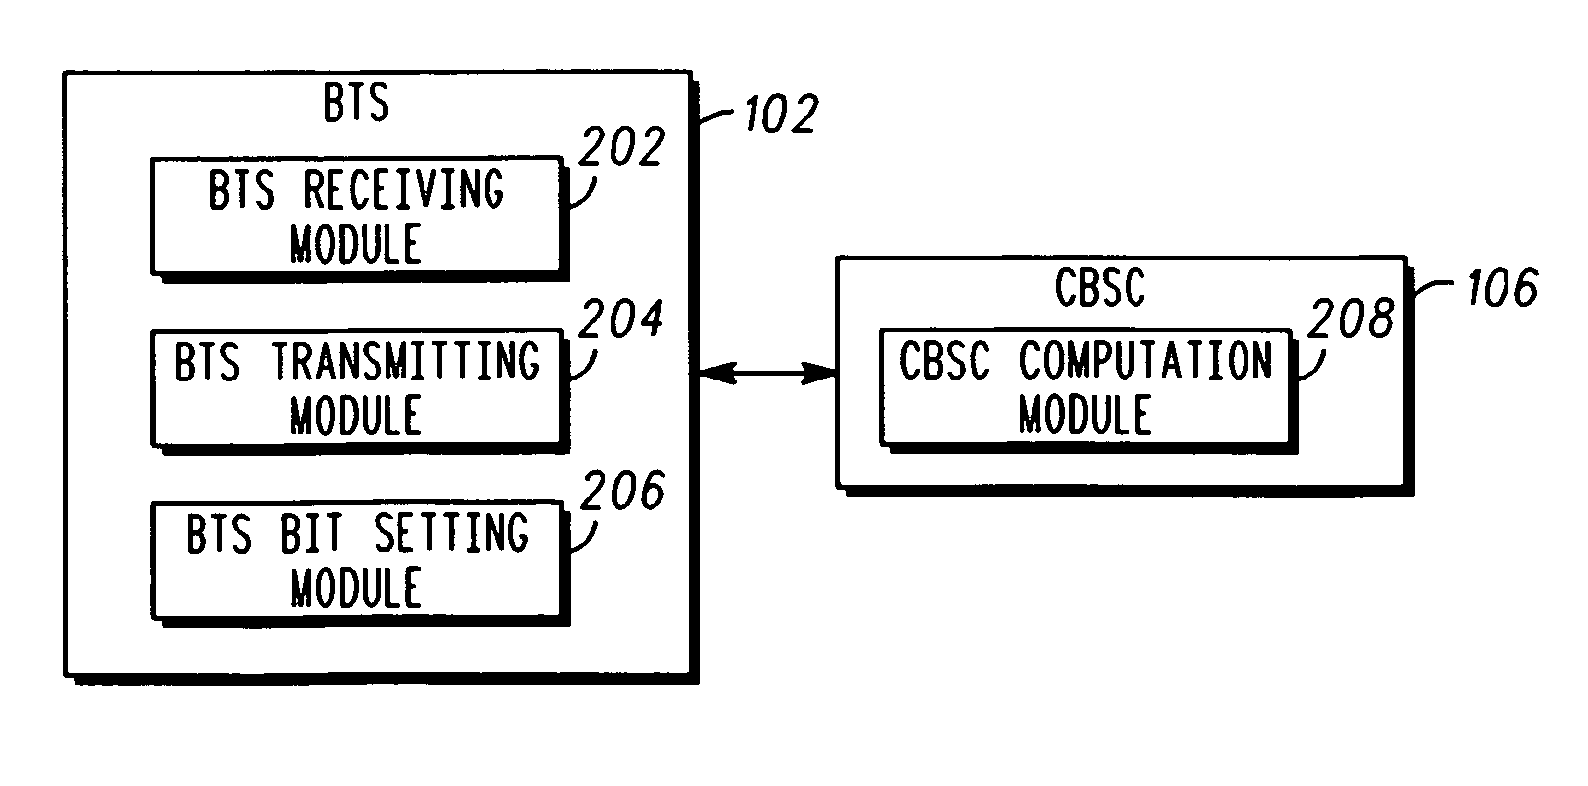 Method and system for achieving alignment between a centralized base station controller (CBSC) and a base transceiver site (BTS) in a network